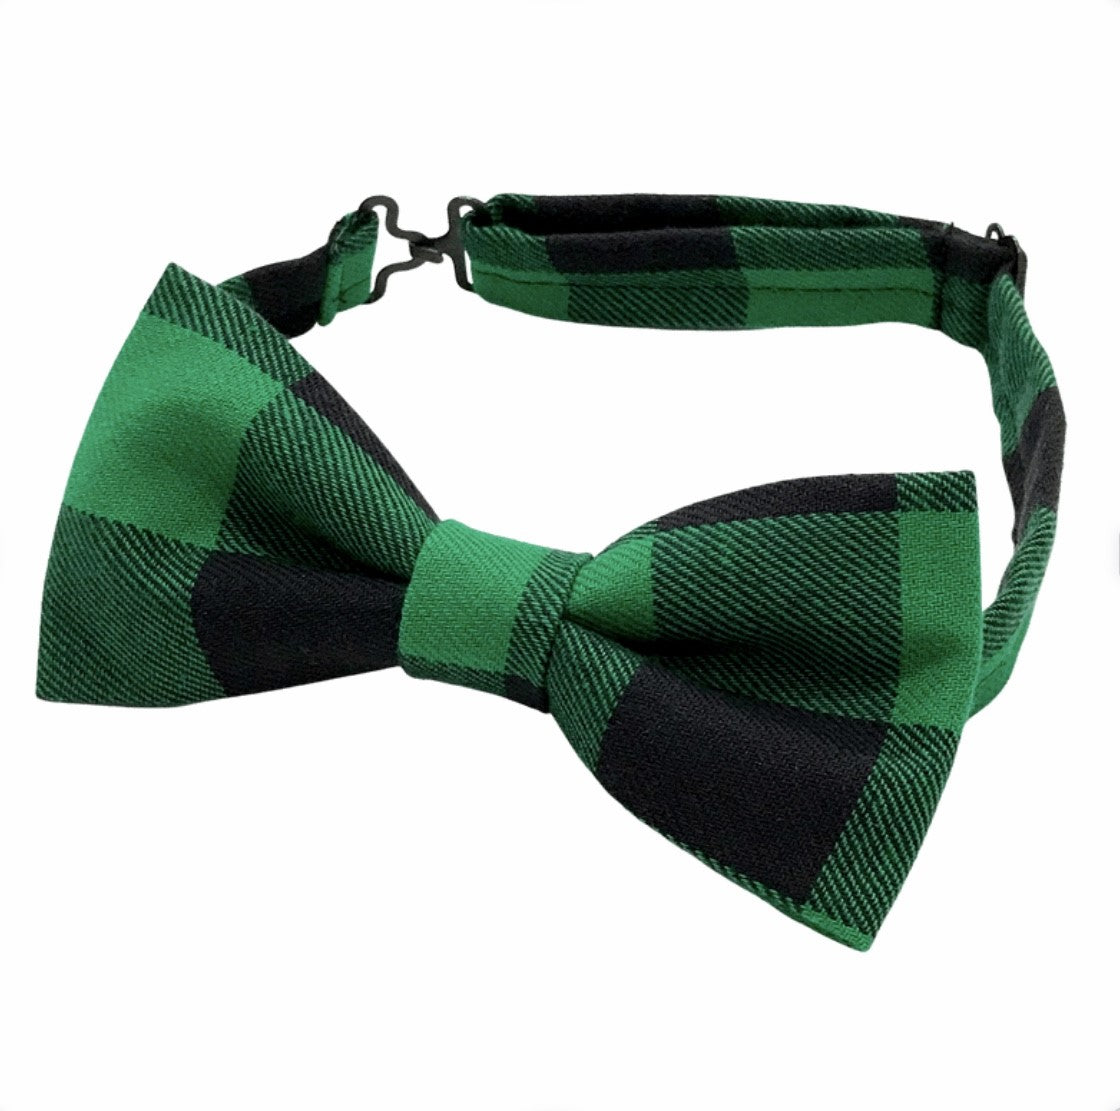 Green and Black Plaid Bow tie 